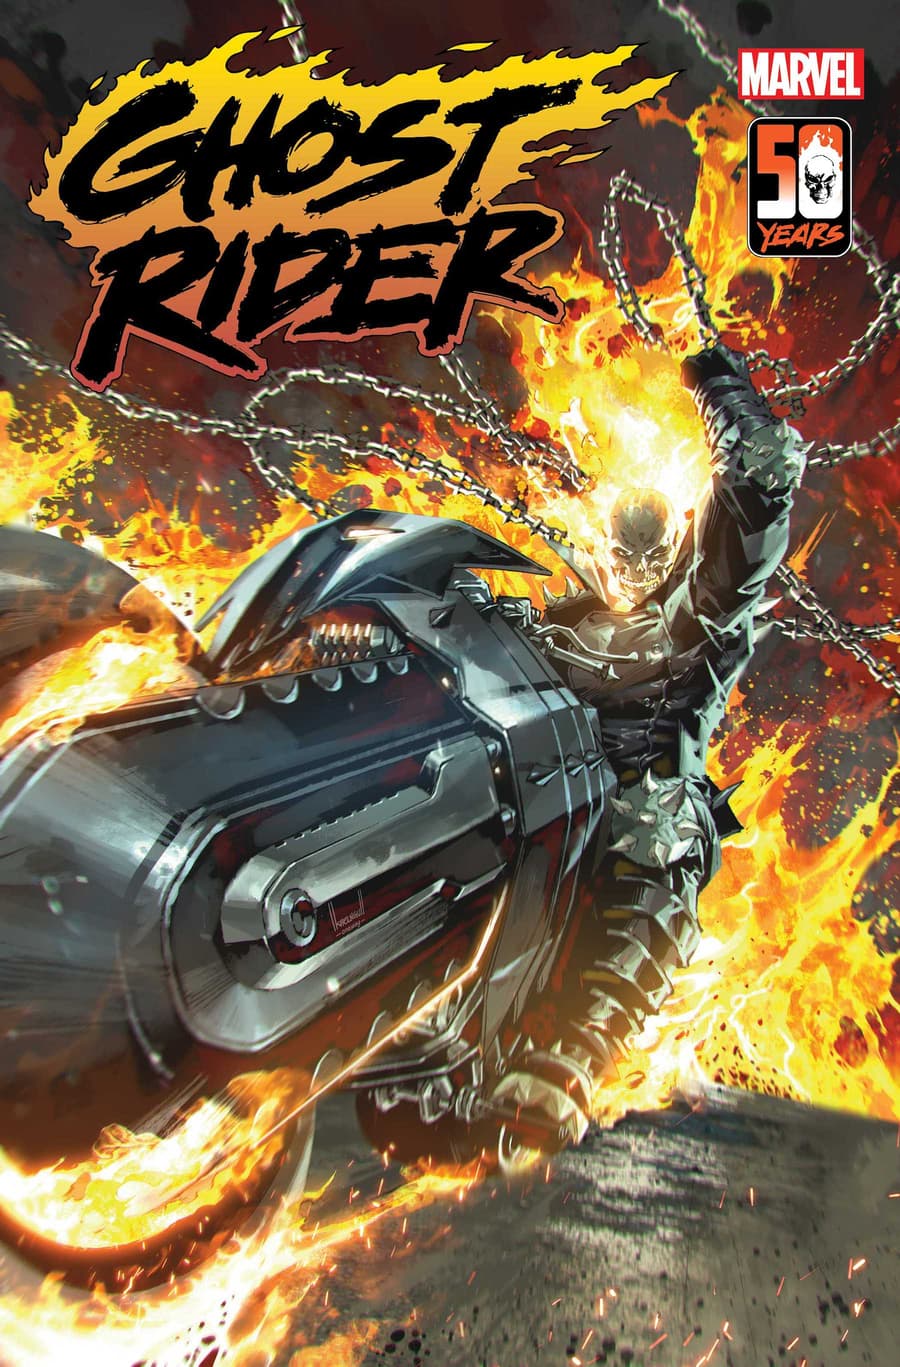 GHOST RIDER #1 cover by Kael Ngu